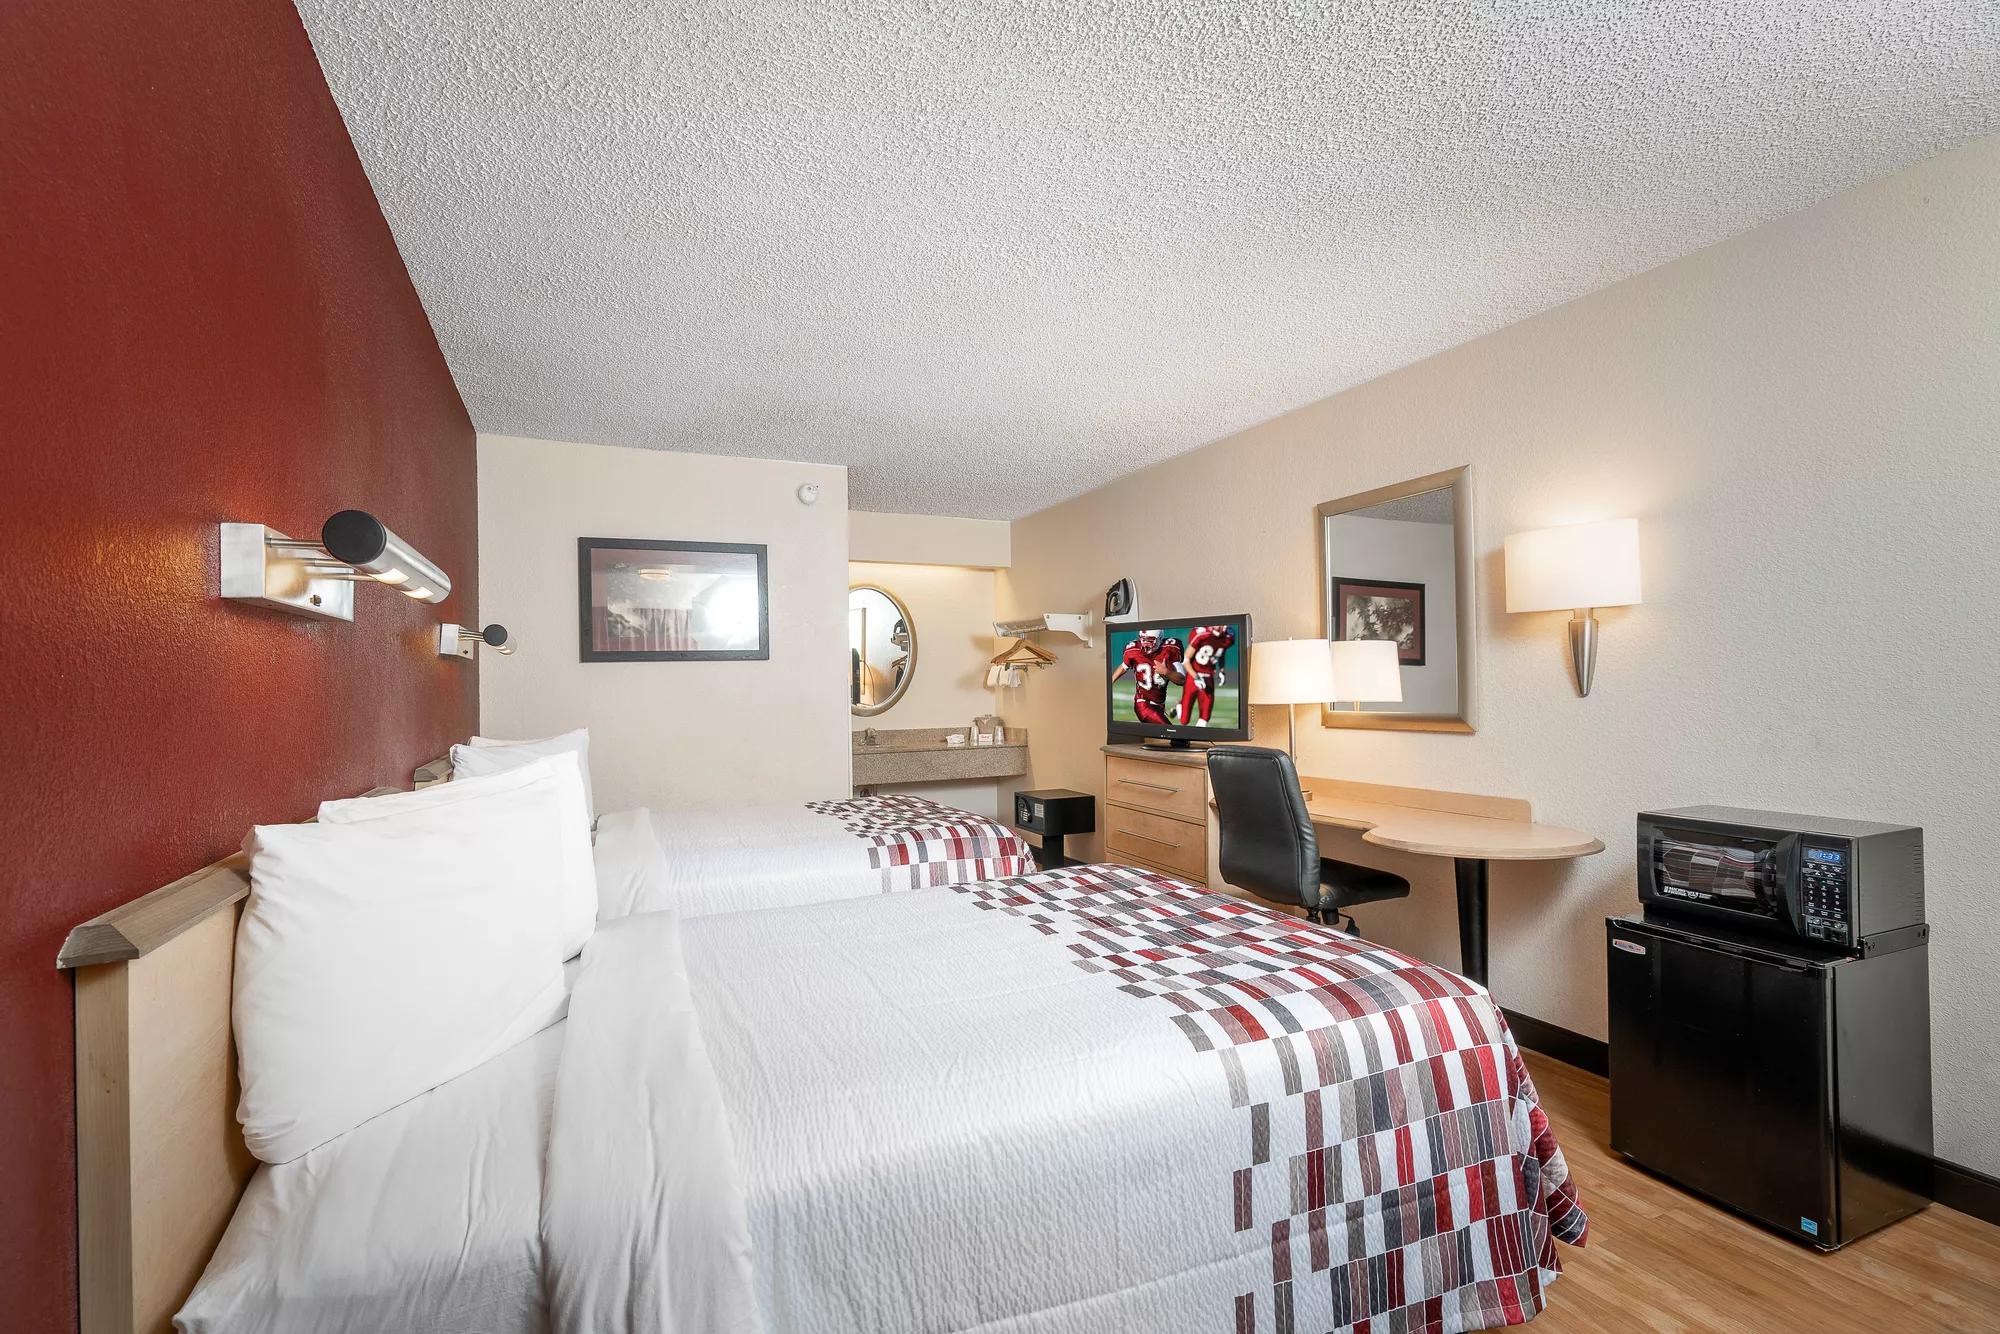 Red Roof Inn Buffalo - Niagara Airport Deluxe Double Room Image Details